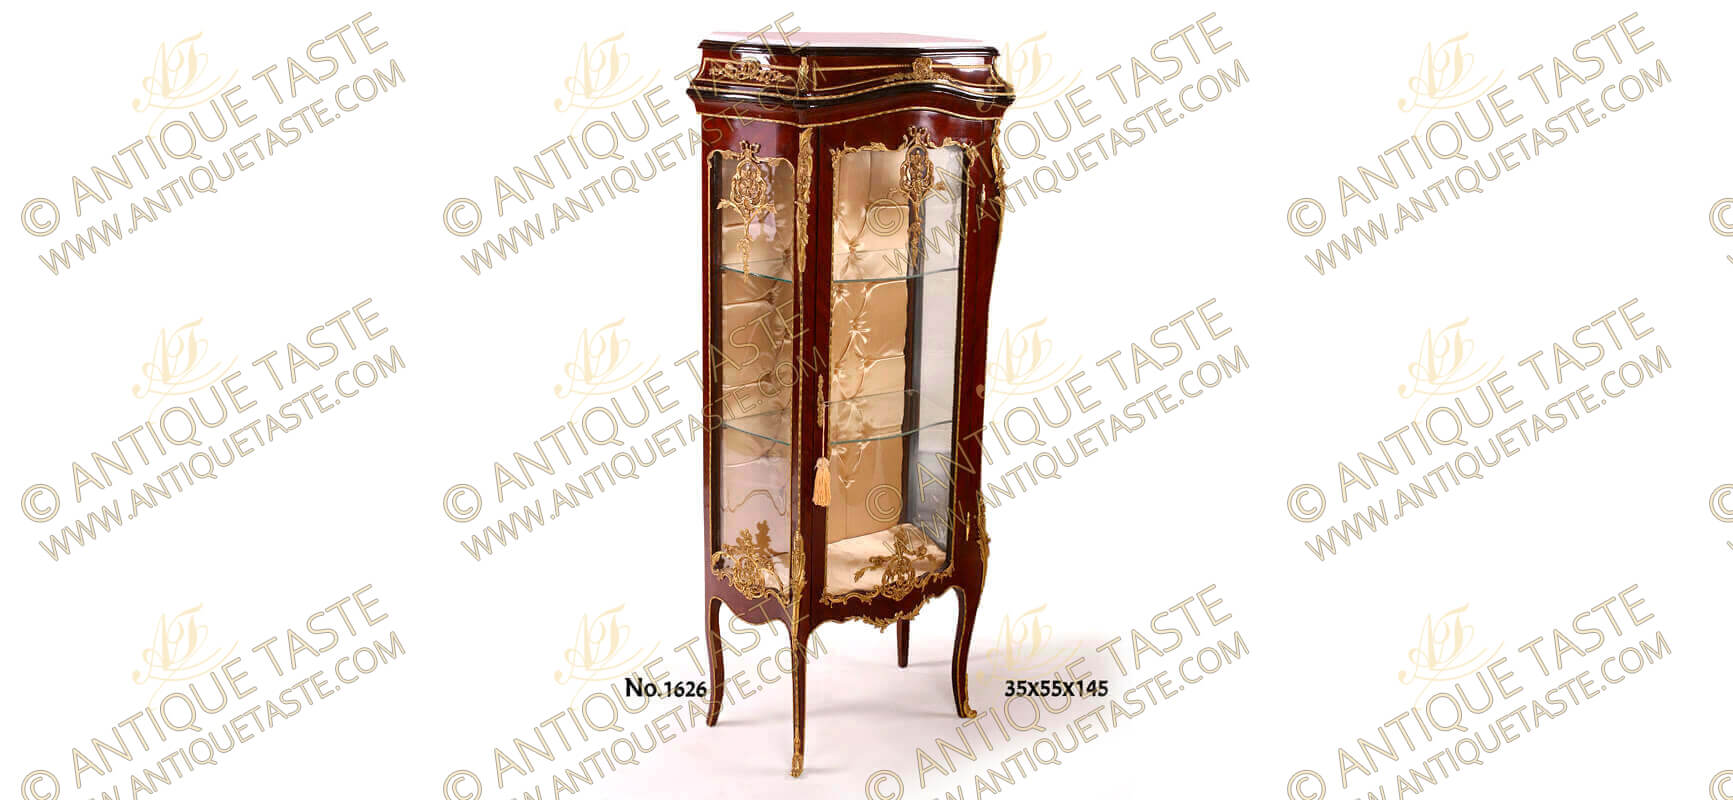 French Louis Display Vitrine, Furniture Corner XVI Louis style Reproductions Cabinet, XV